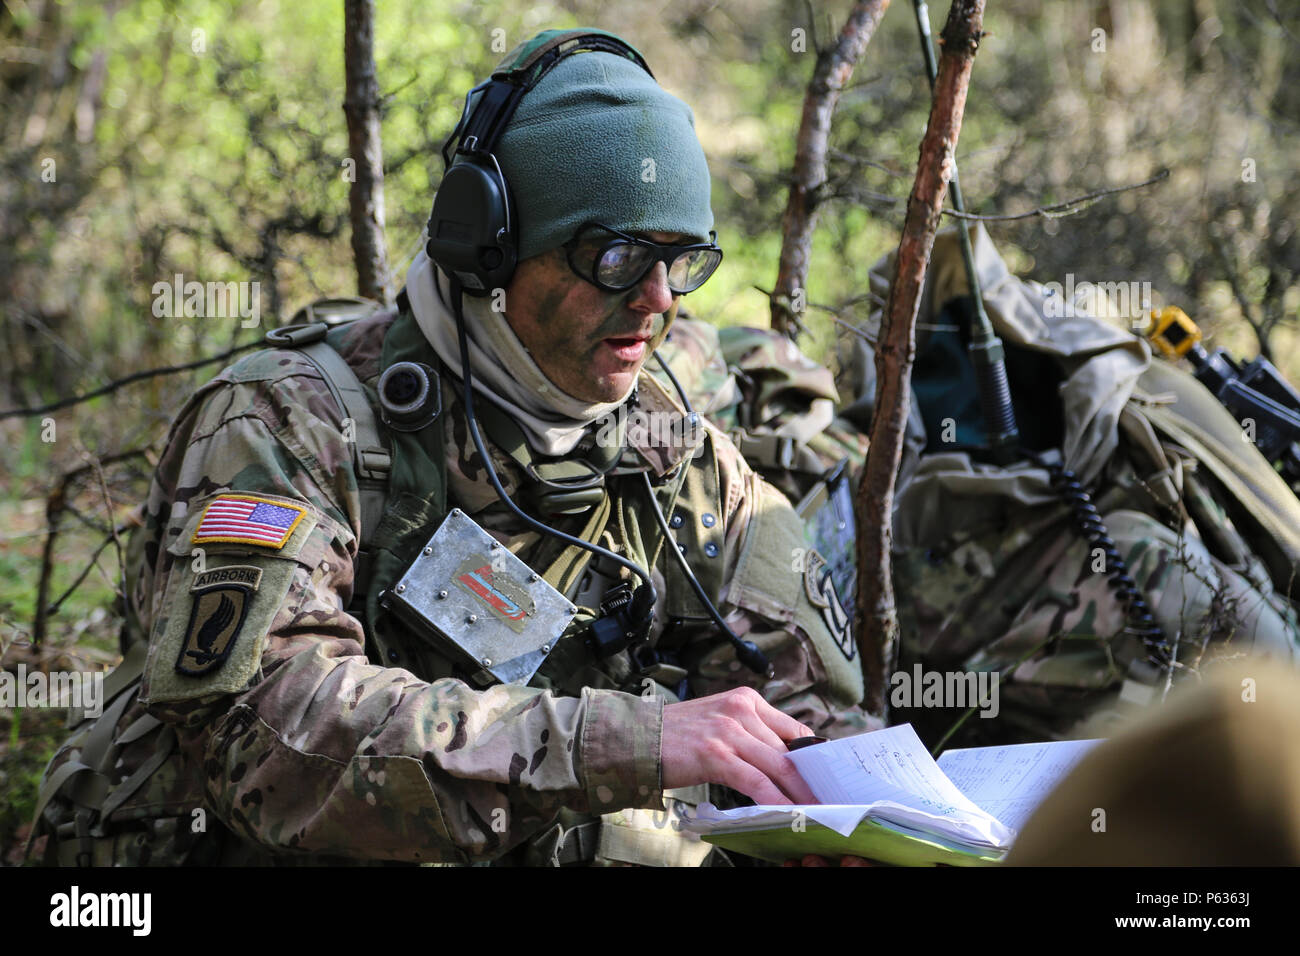 A U.S. Soldier of the 173rd Airborne Brigade discuss mission updates while conducting a pre-mission brief during exercise Saber Junction 16 at the U.S. Army’s Joint Multinational Readiness Center (JMRC) in Hohenfels, Germany, April 13, 2016. Saber Junction 16 is the U.S. Army Europe’s 173rd Airborne Brigade’s combat training center certification exercise, taking place at the JMRC in Hohenfels, Germany, Mar. 31-Apr. 24, 2016.  The exercise is designed to evaluate the readiness of the Army’s Europe-based combat brigades to conduct unified land operations and promote interoperability in a joint,  Stock Photo